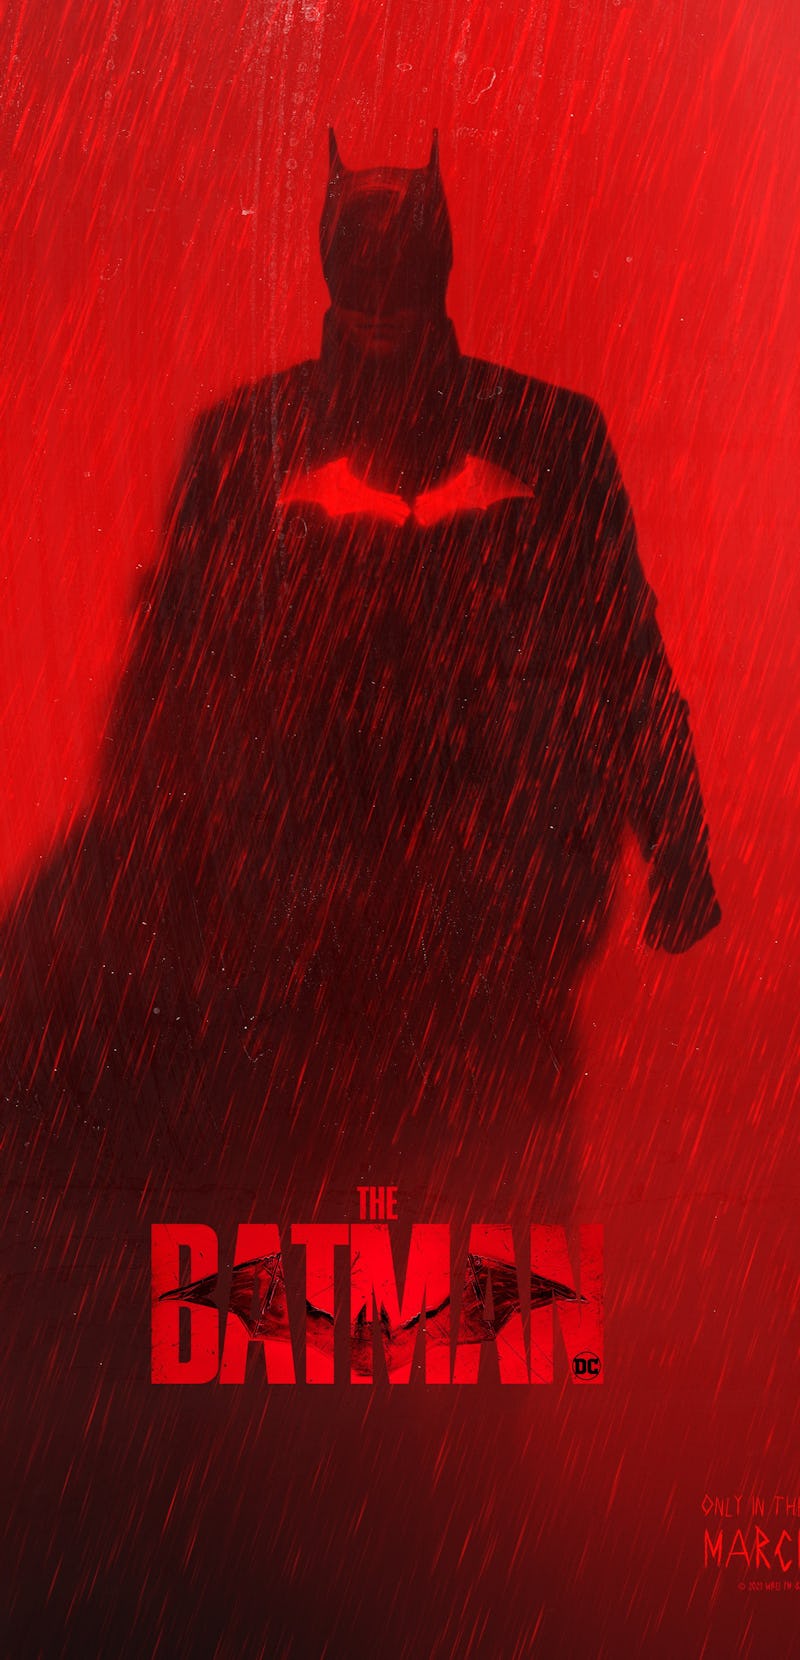 A black and red painting poster for The Batman movie